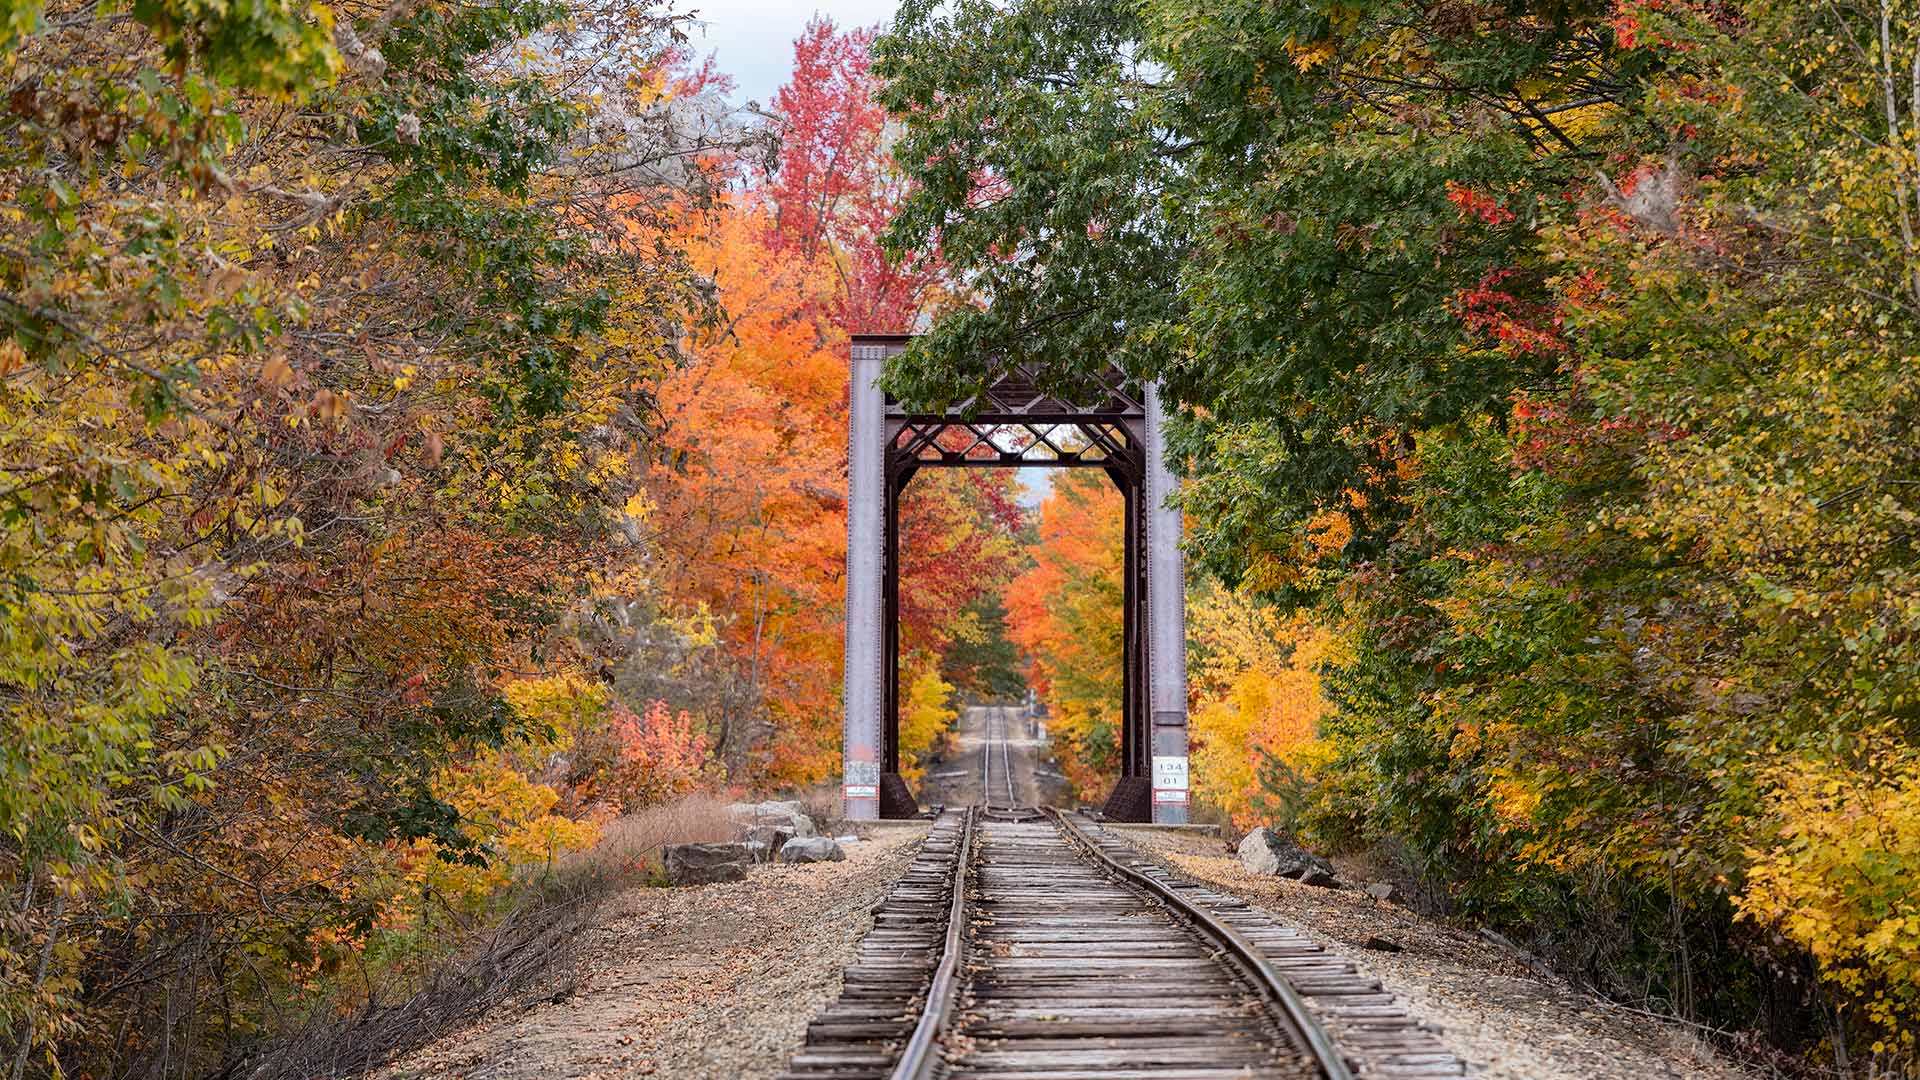 Stretch of the Conway Scenic Railroad during the Fall